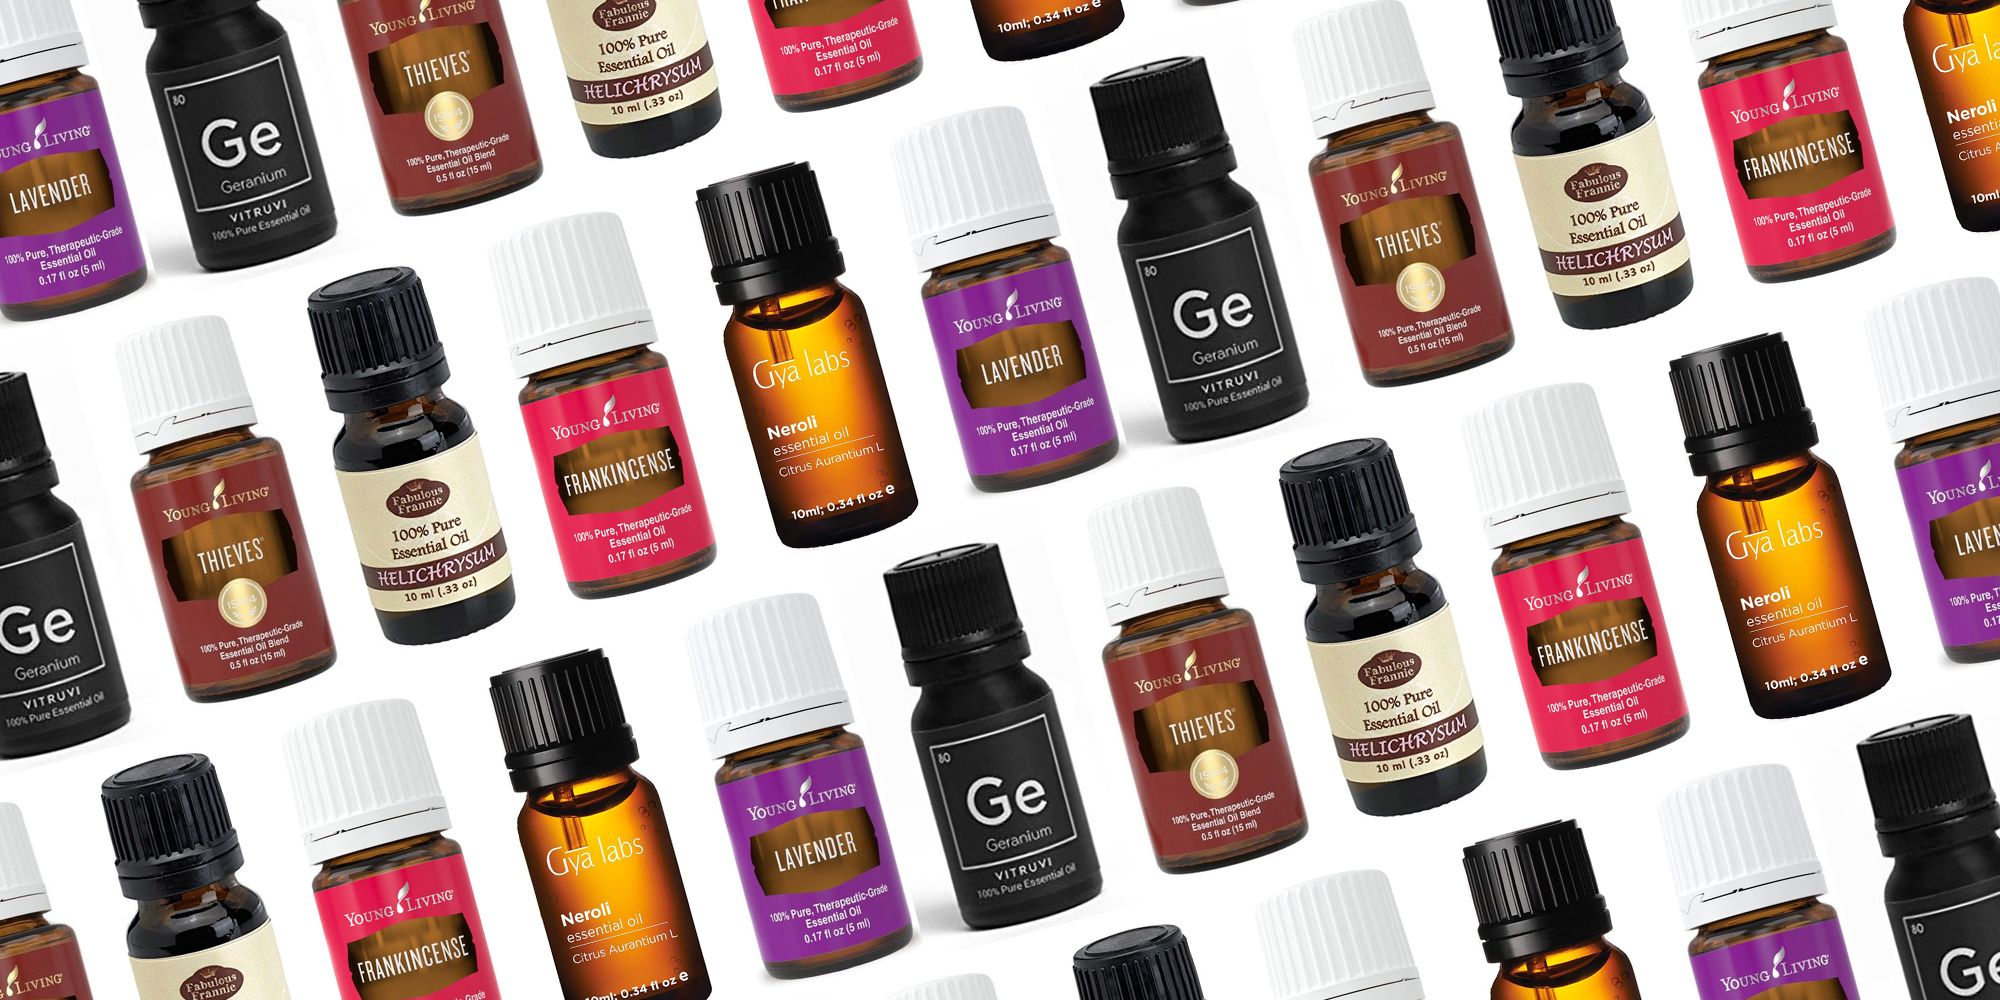 9 Essential Oils for Skin: Essentials for Your Beauty Regime!